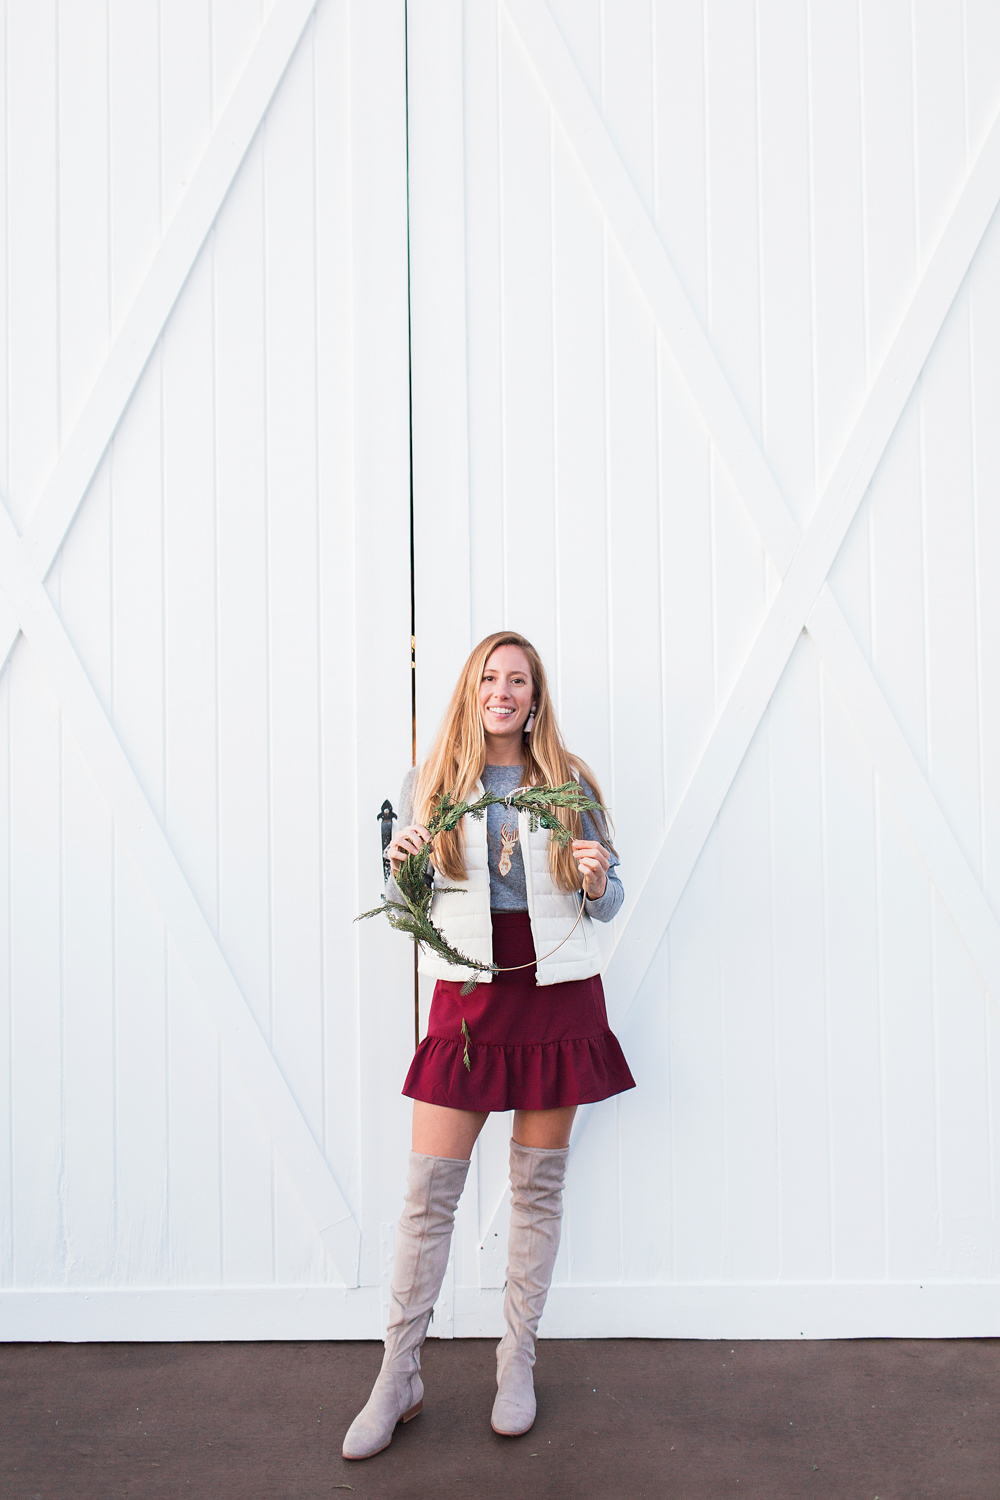 How to Make a Christmas Wreath | Winter Outfit Inspiration | Central Florida Blogger Meetup | What to Wear During the Holidays | J.Crew Factory Ruffle Skirt | Grey Over the Knee Boots | LOFT White Puffer Vest